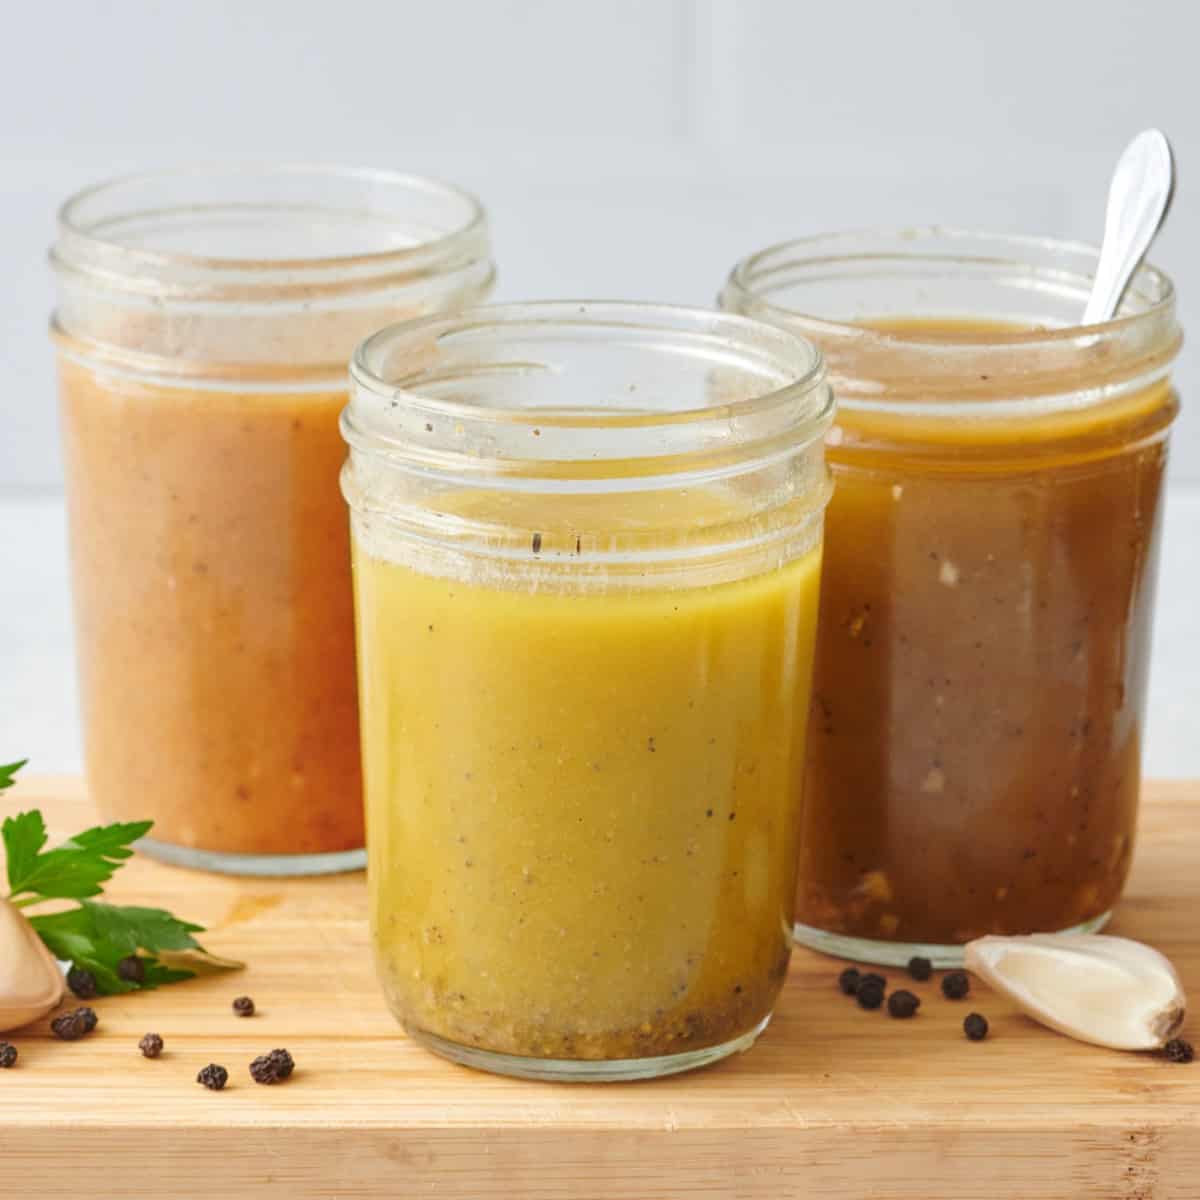 How to Make Salad Dressing {2 METHODS} - FeelGoodFoodie